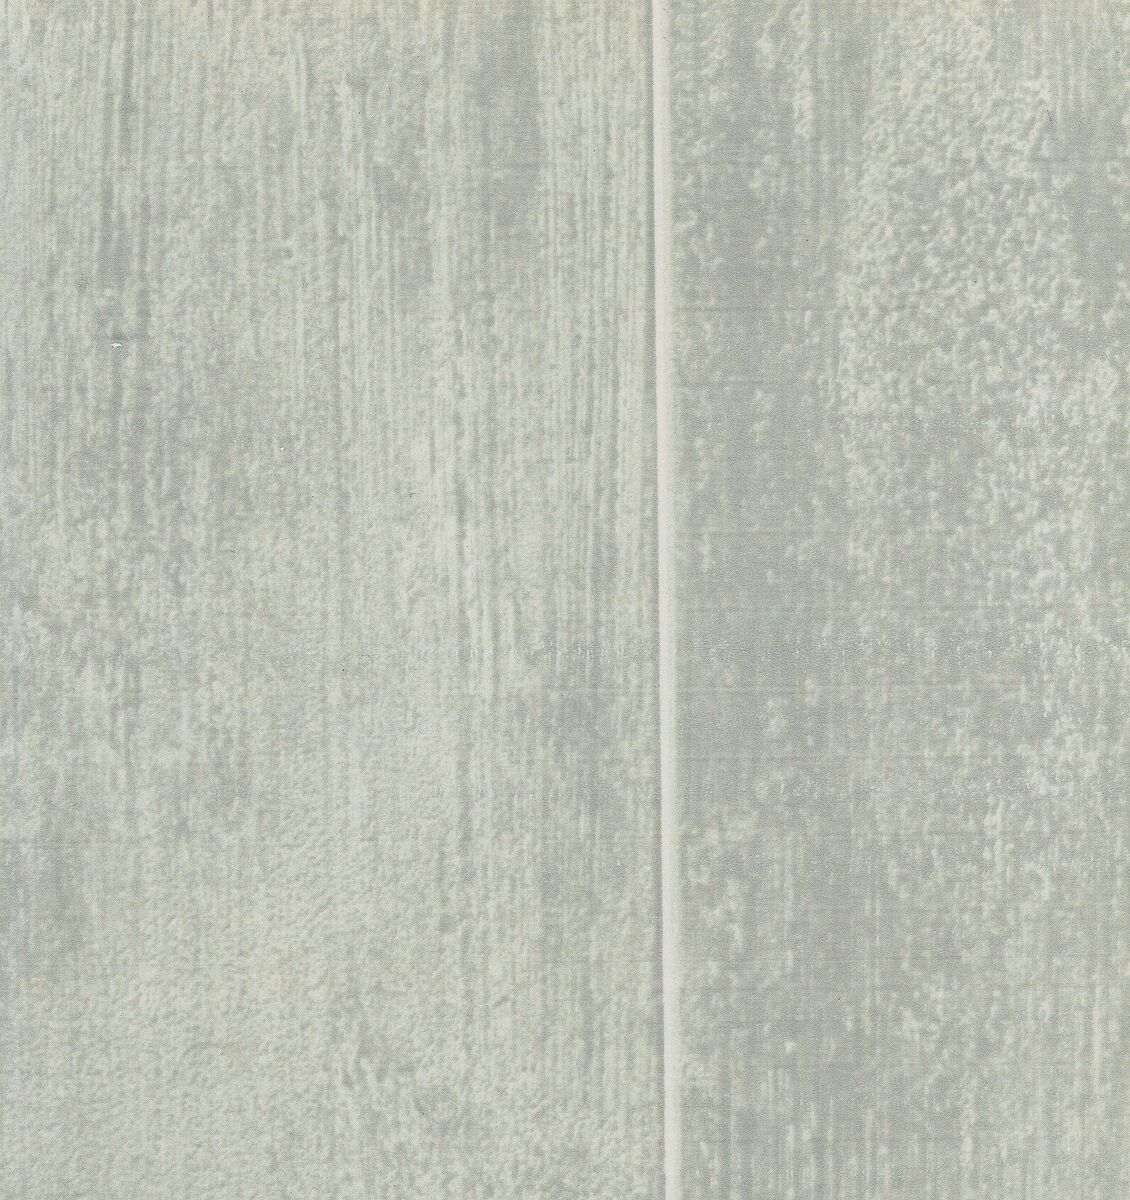 Swatch of Large moonstone tile wall panel